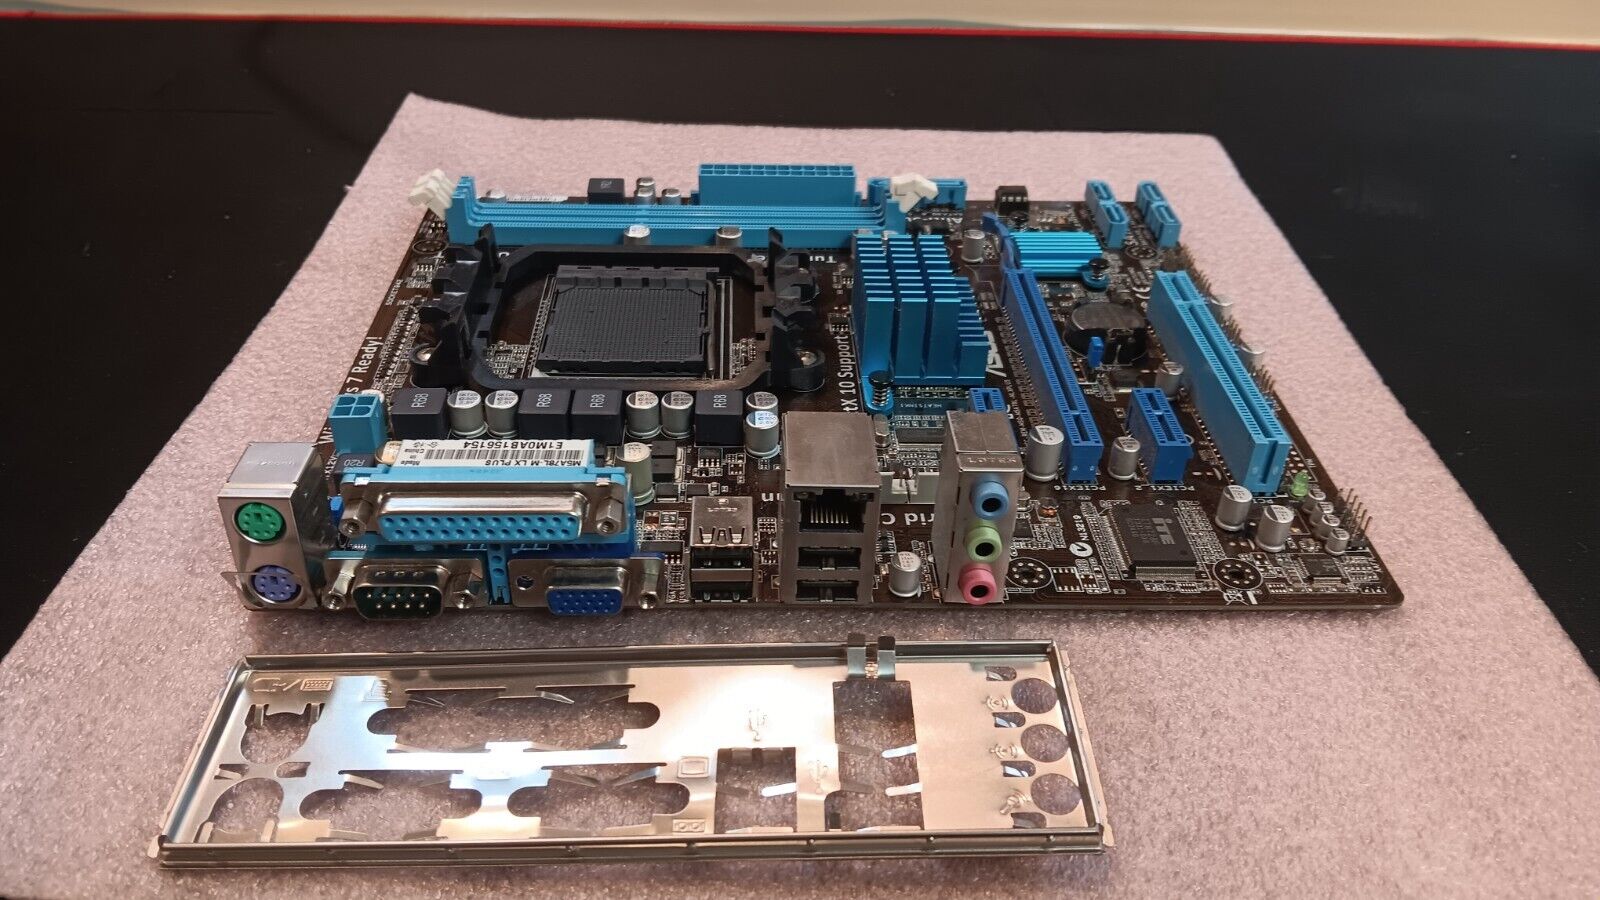 Asus M5A78L-M LX Plus Rev 3.01 1701 Socket AM3+ Motherboard with IO Shield